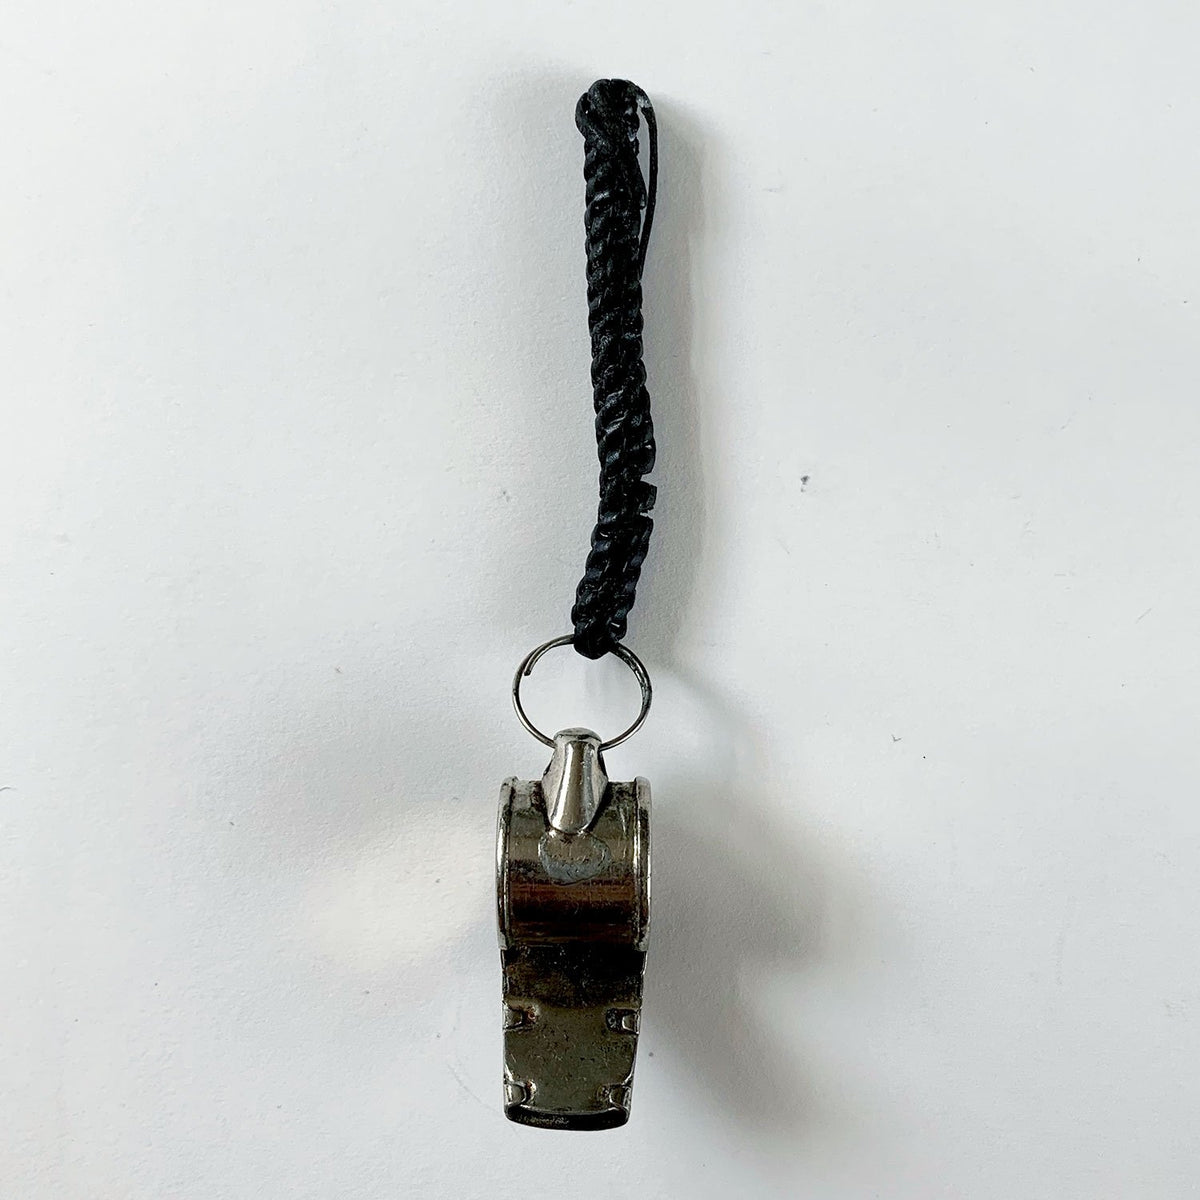 Vintage Whistle with Braided Leather Strap